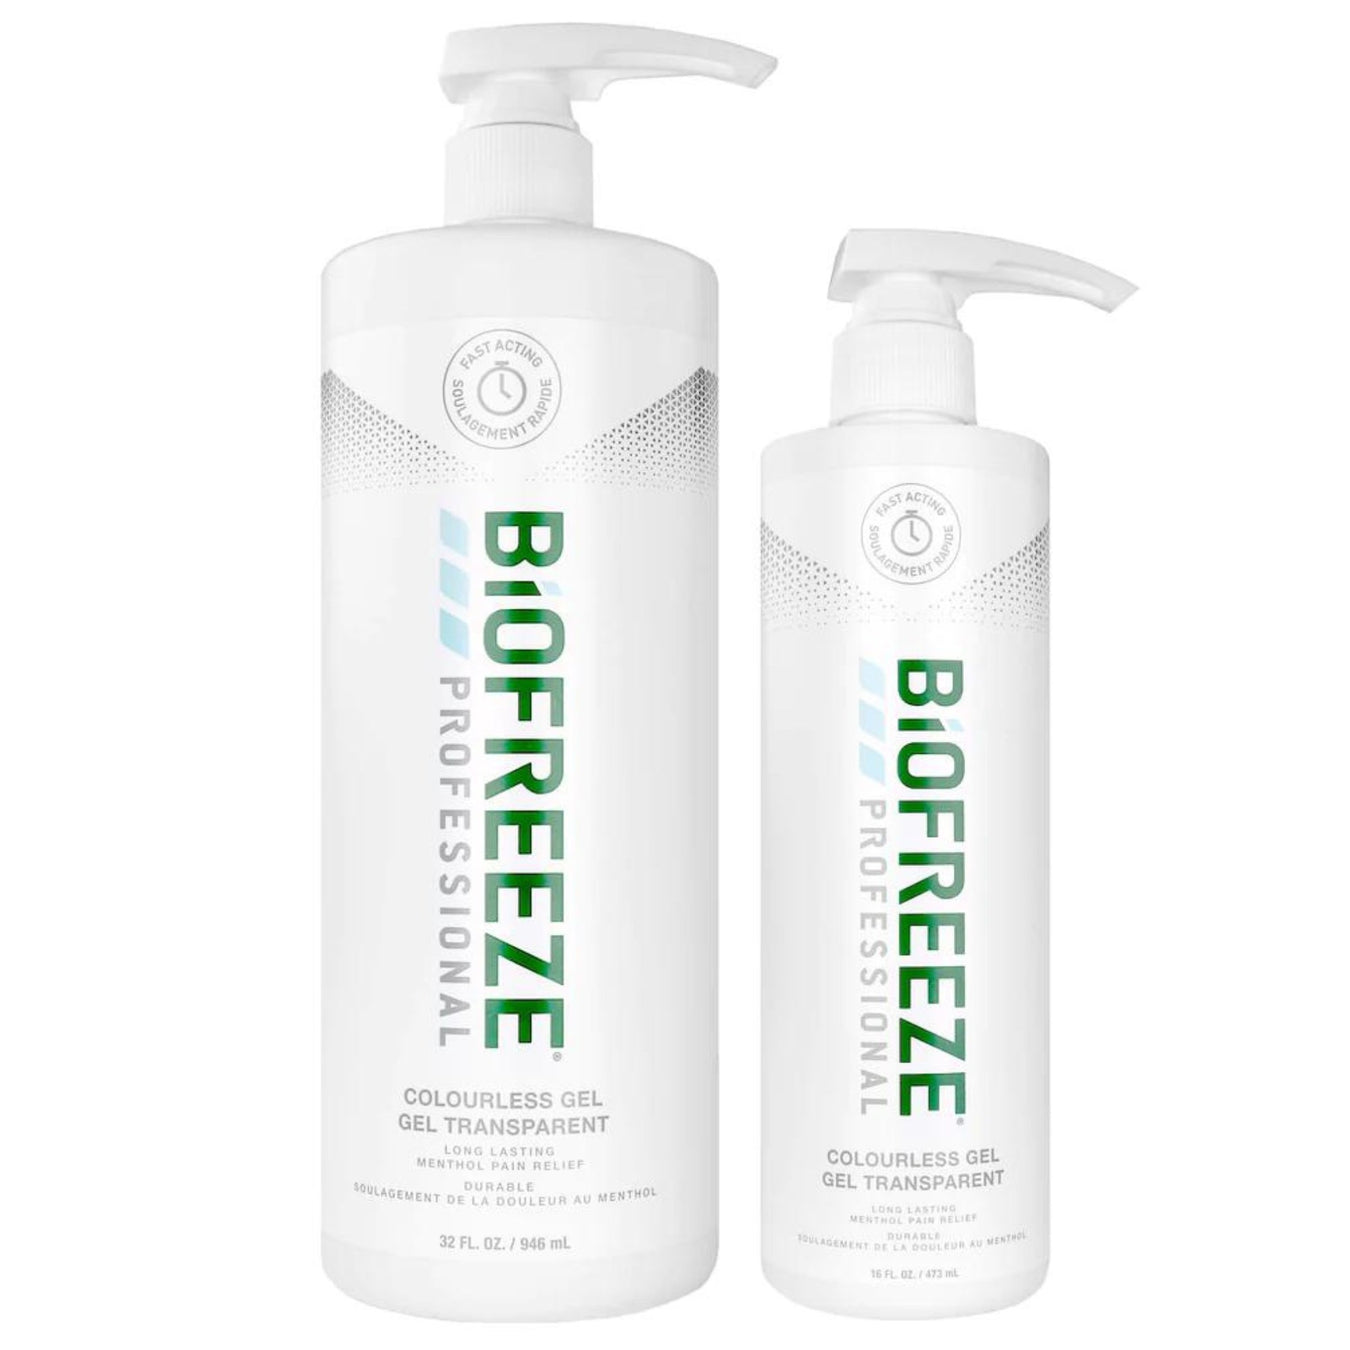 Shop Topical Analgesics featuring Biofreeze Professional